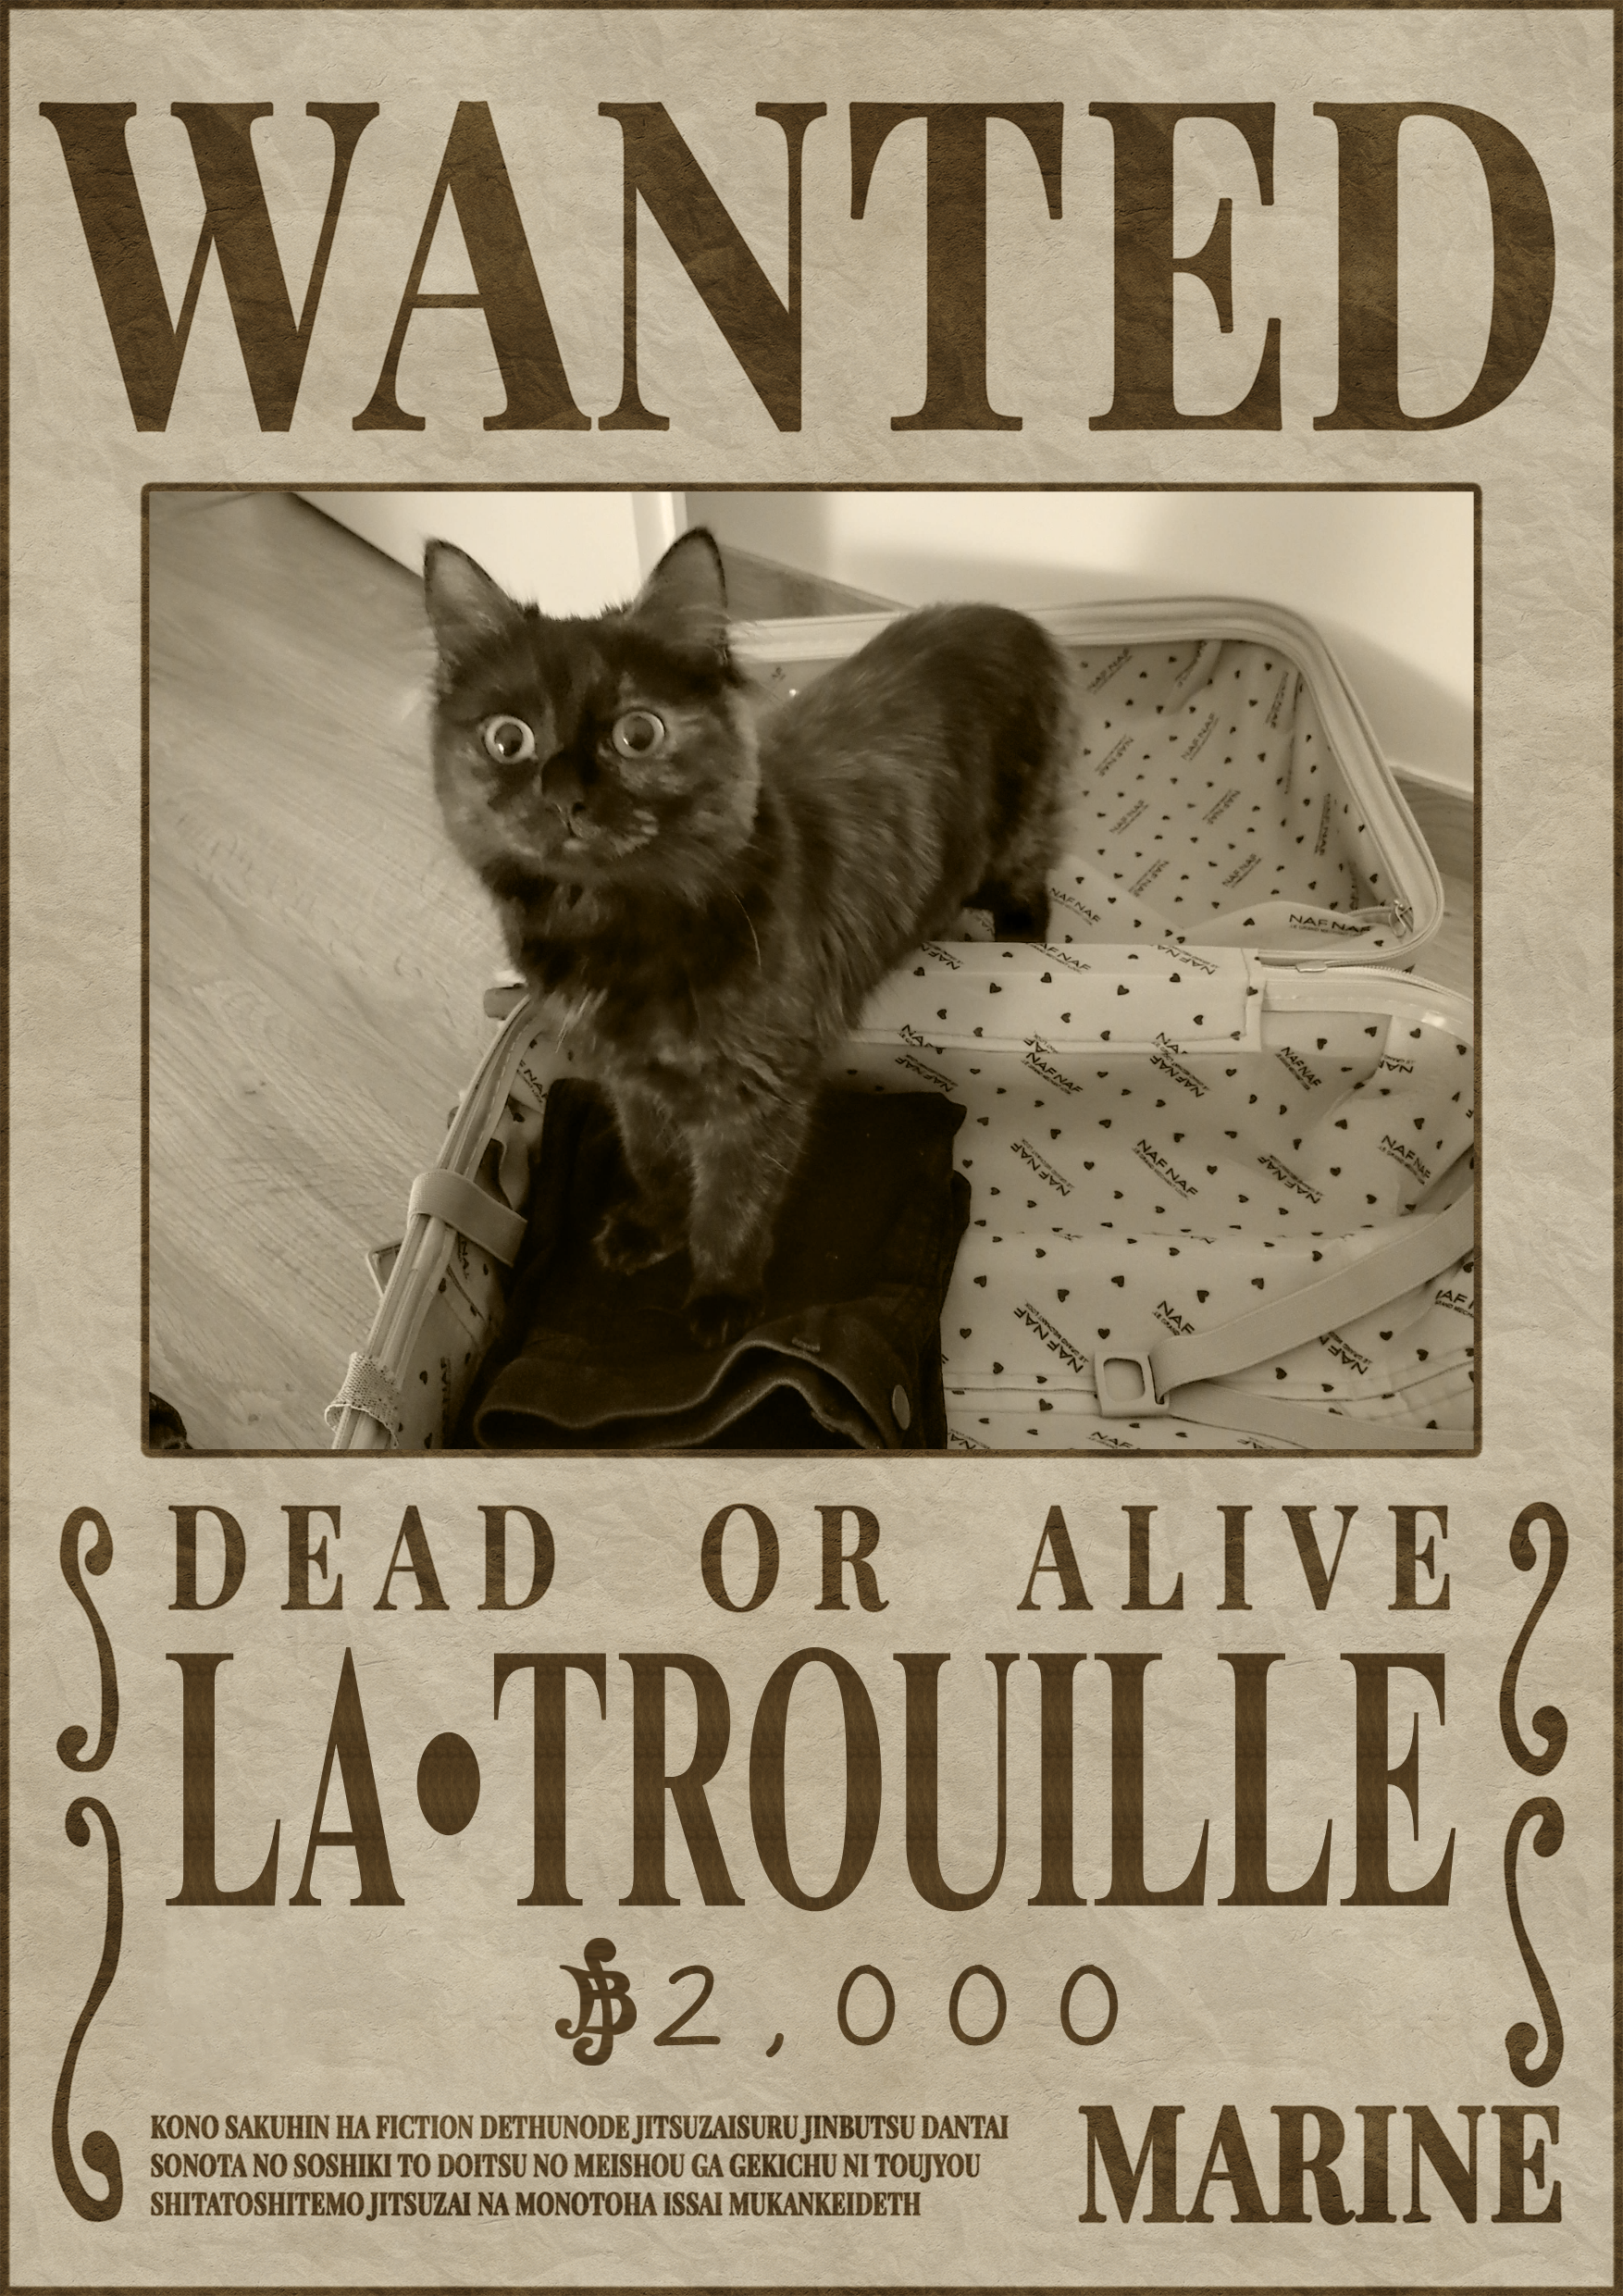 One Piece wanted poster of Trouille